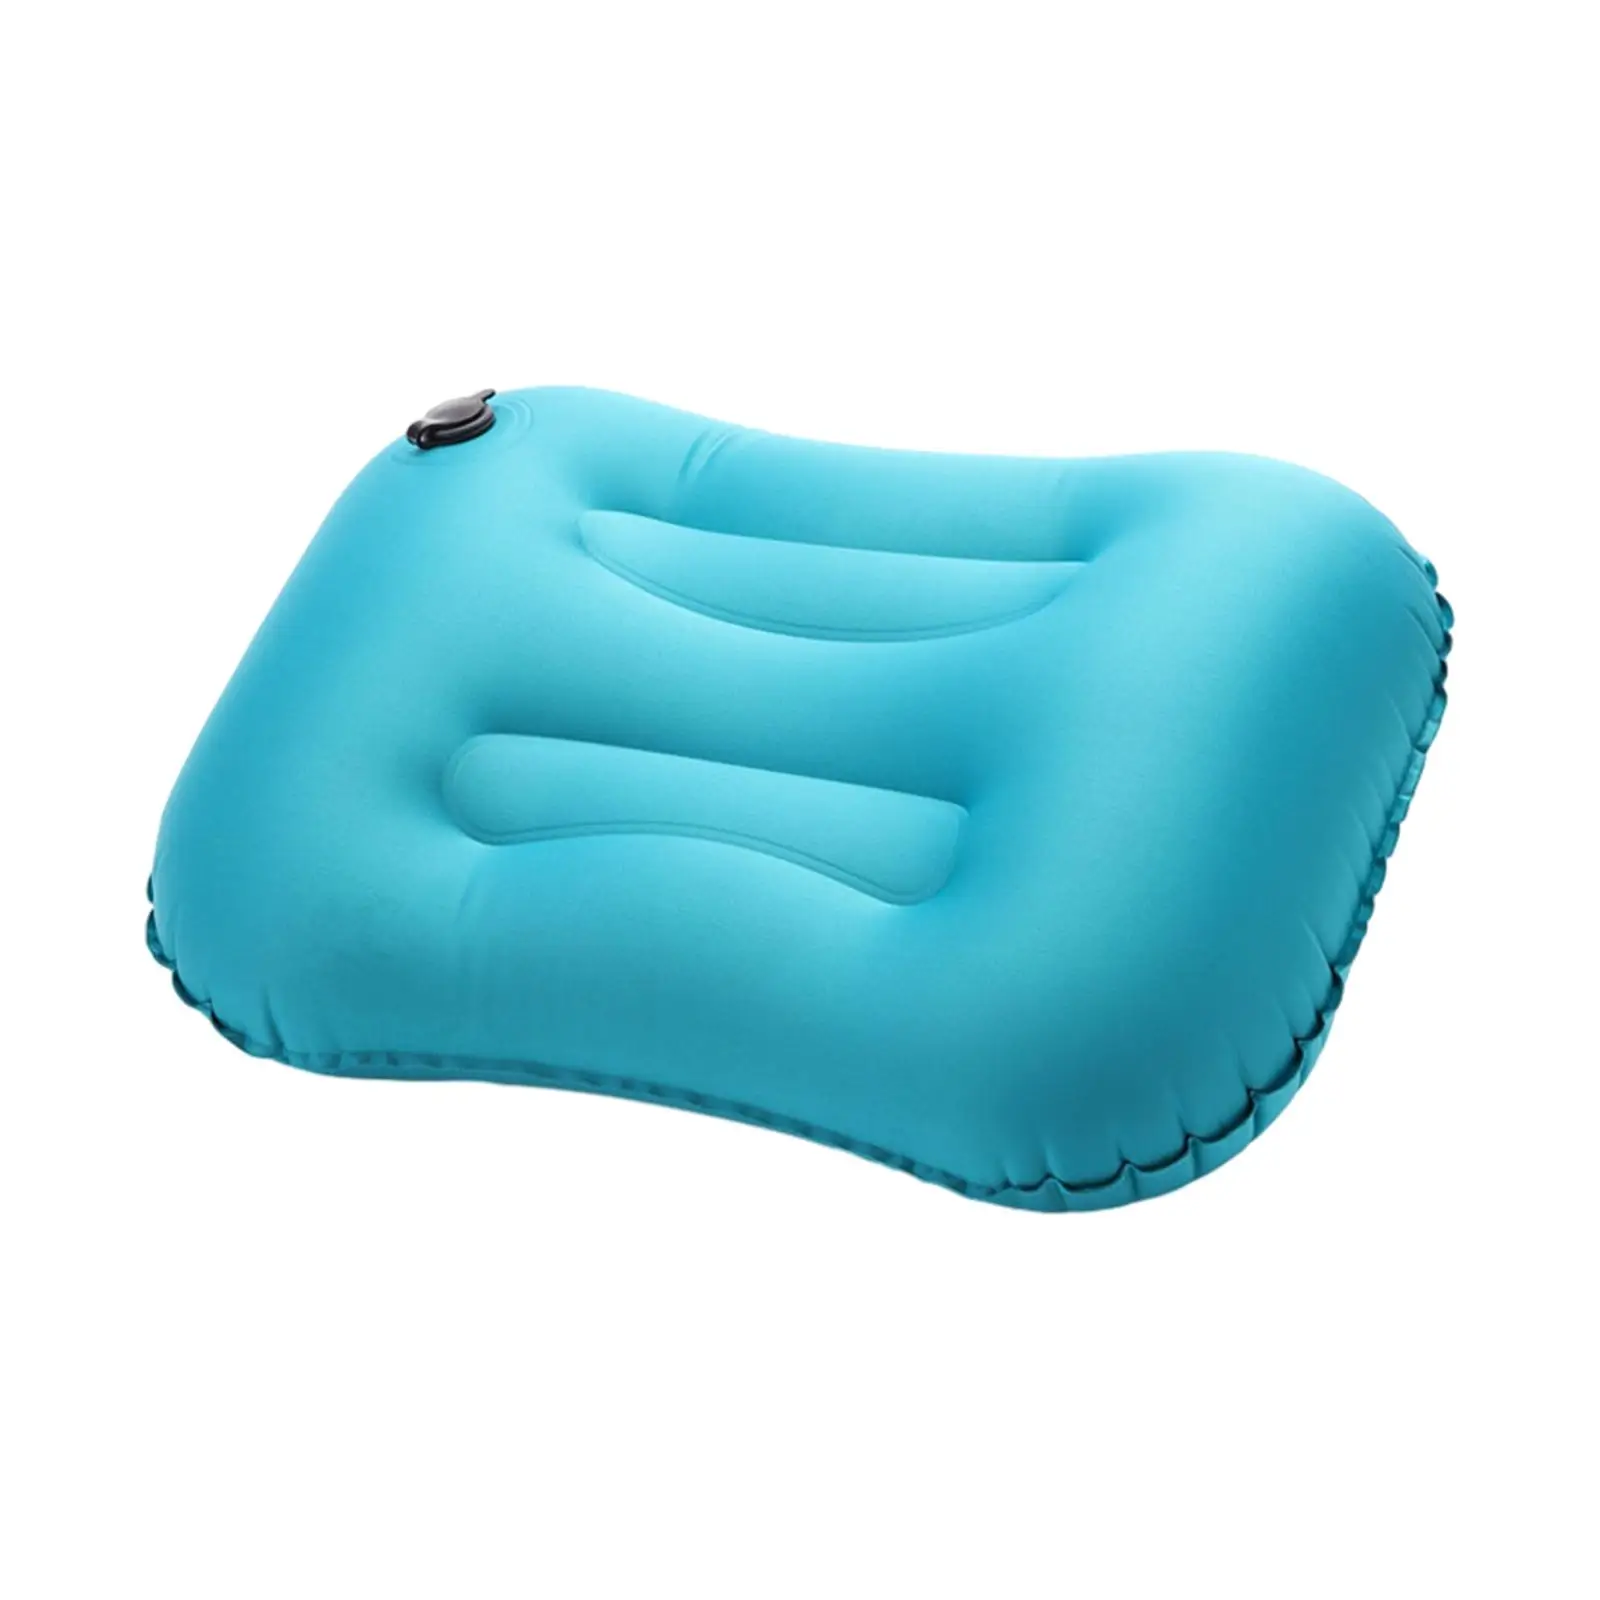 Inflatable Pillow, Compressible Pillow, Lightweight Blow up Air Pillow, Travel Pillow for Camping, Outdoor, Indoor